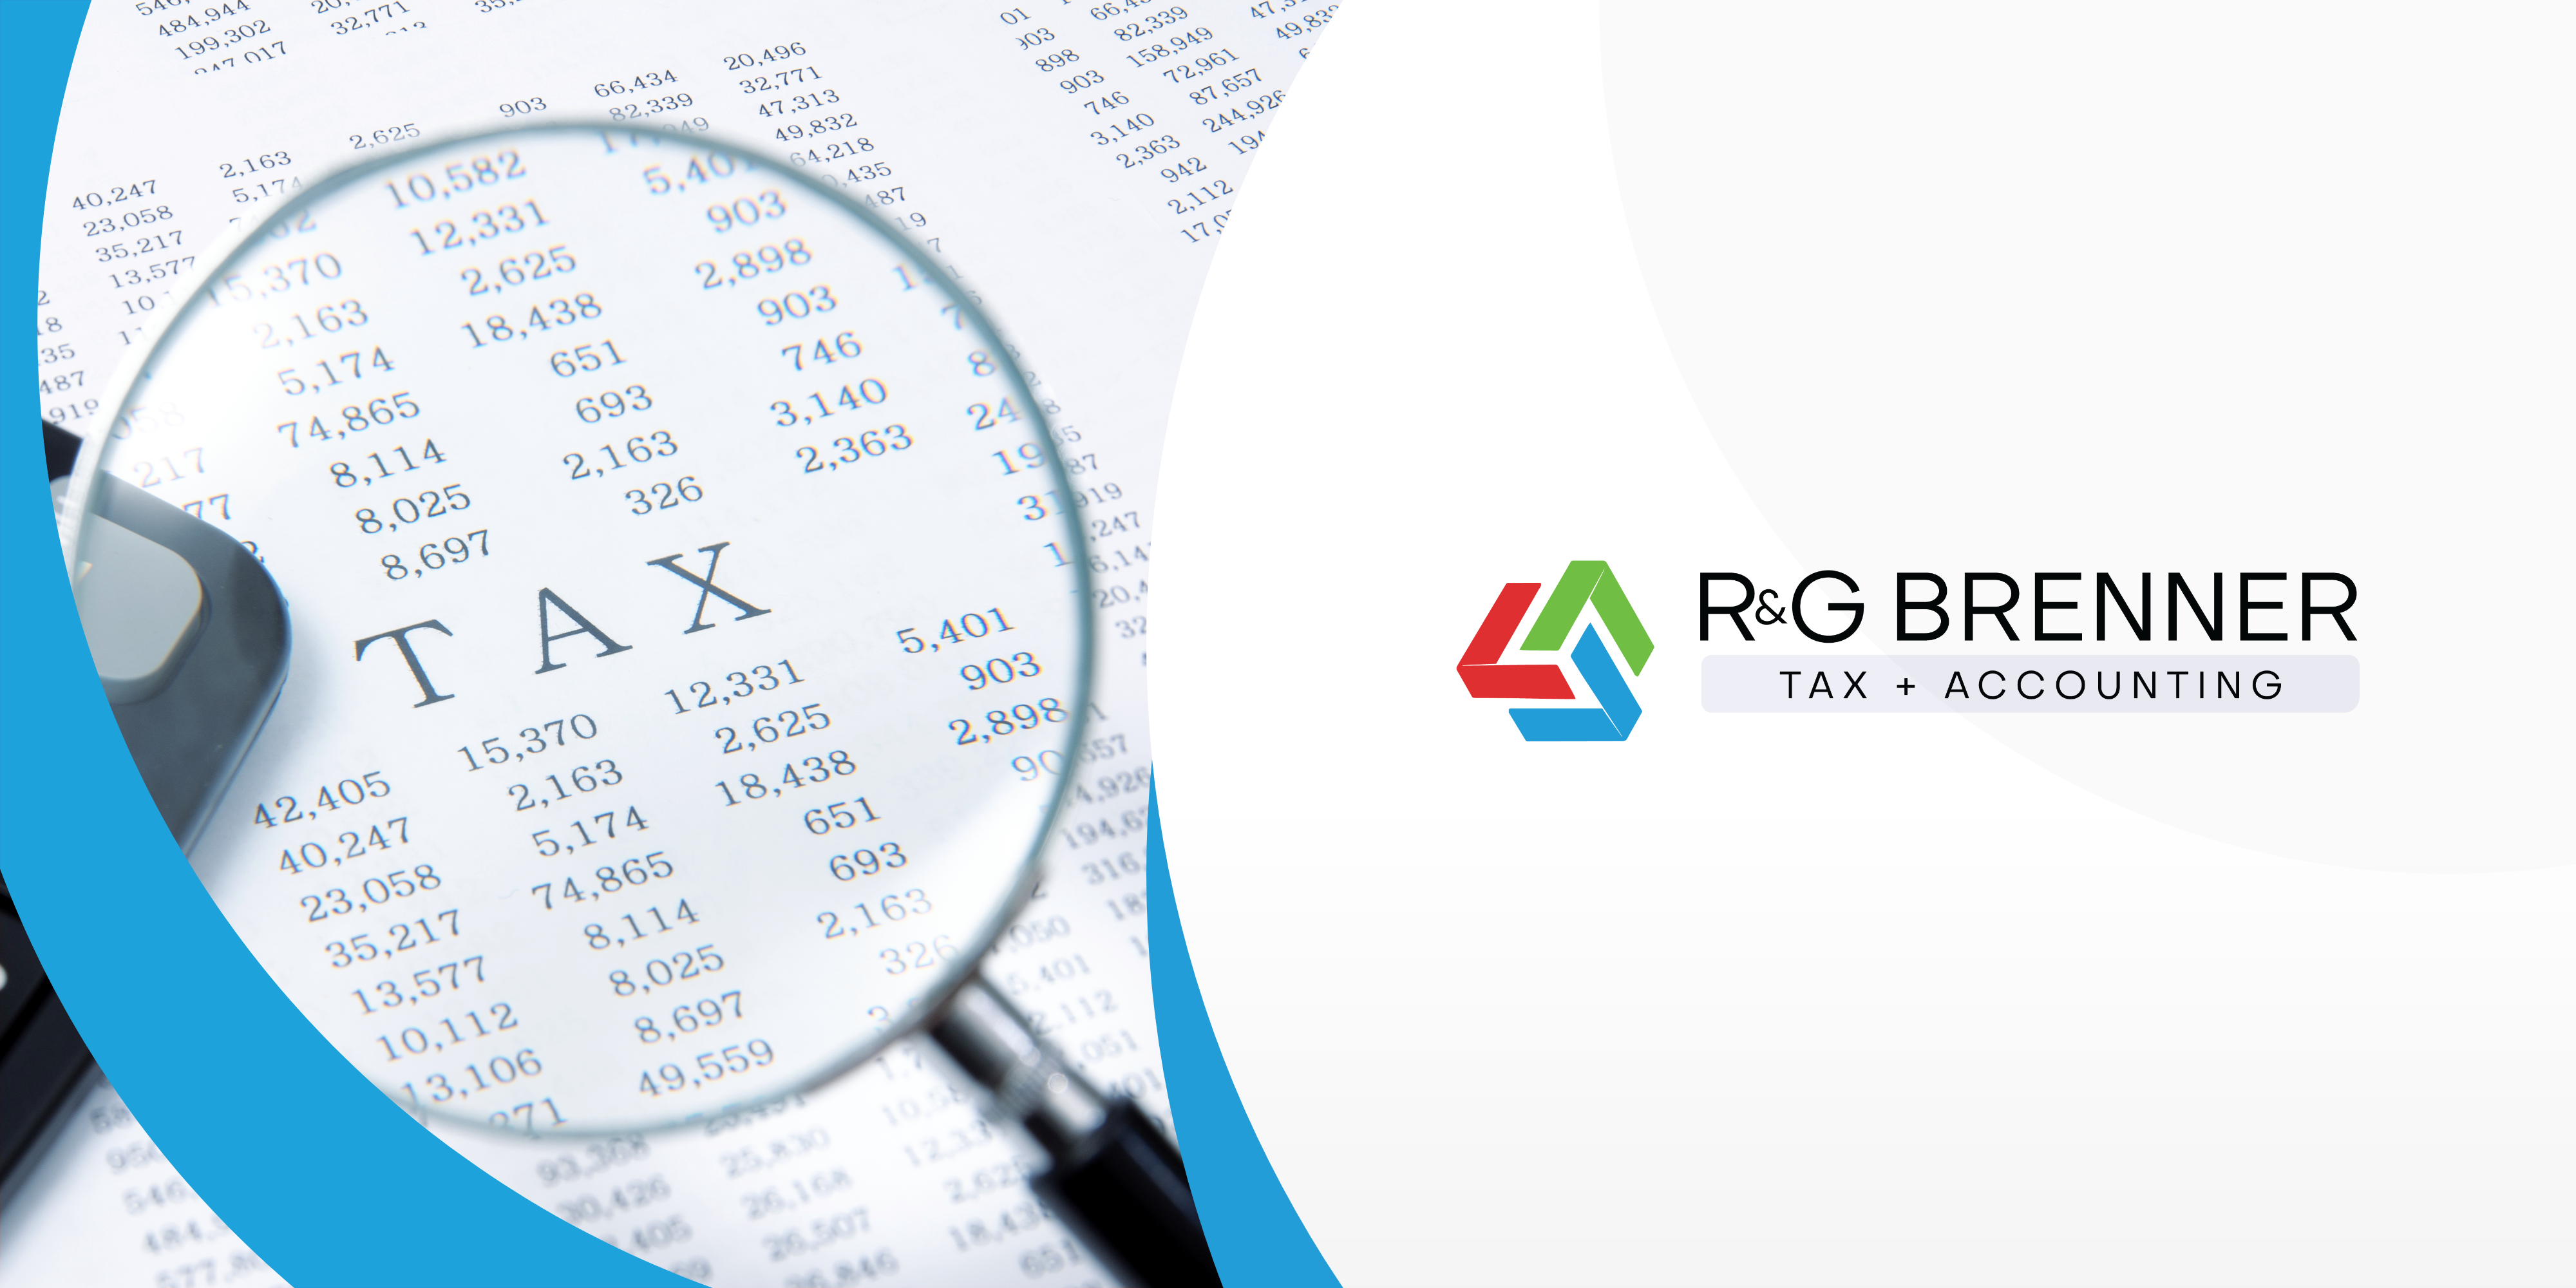 To the left, a financial statement sits behind a magnifying glass. To the right is the R&G Brenner logo on a white background.